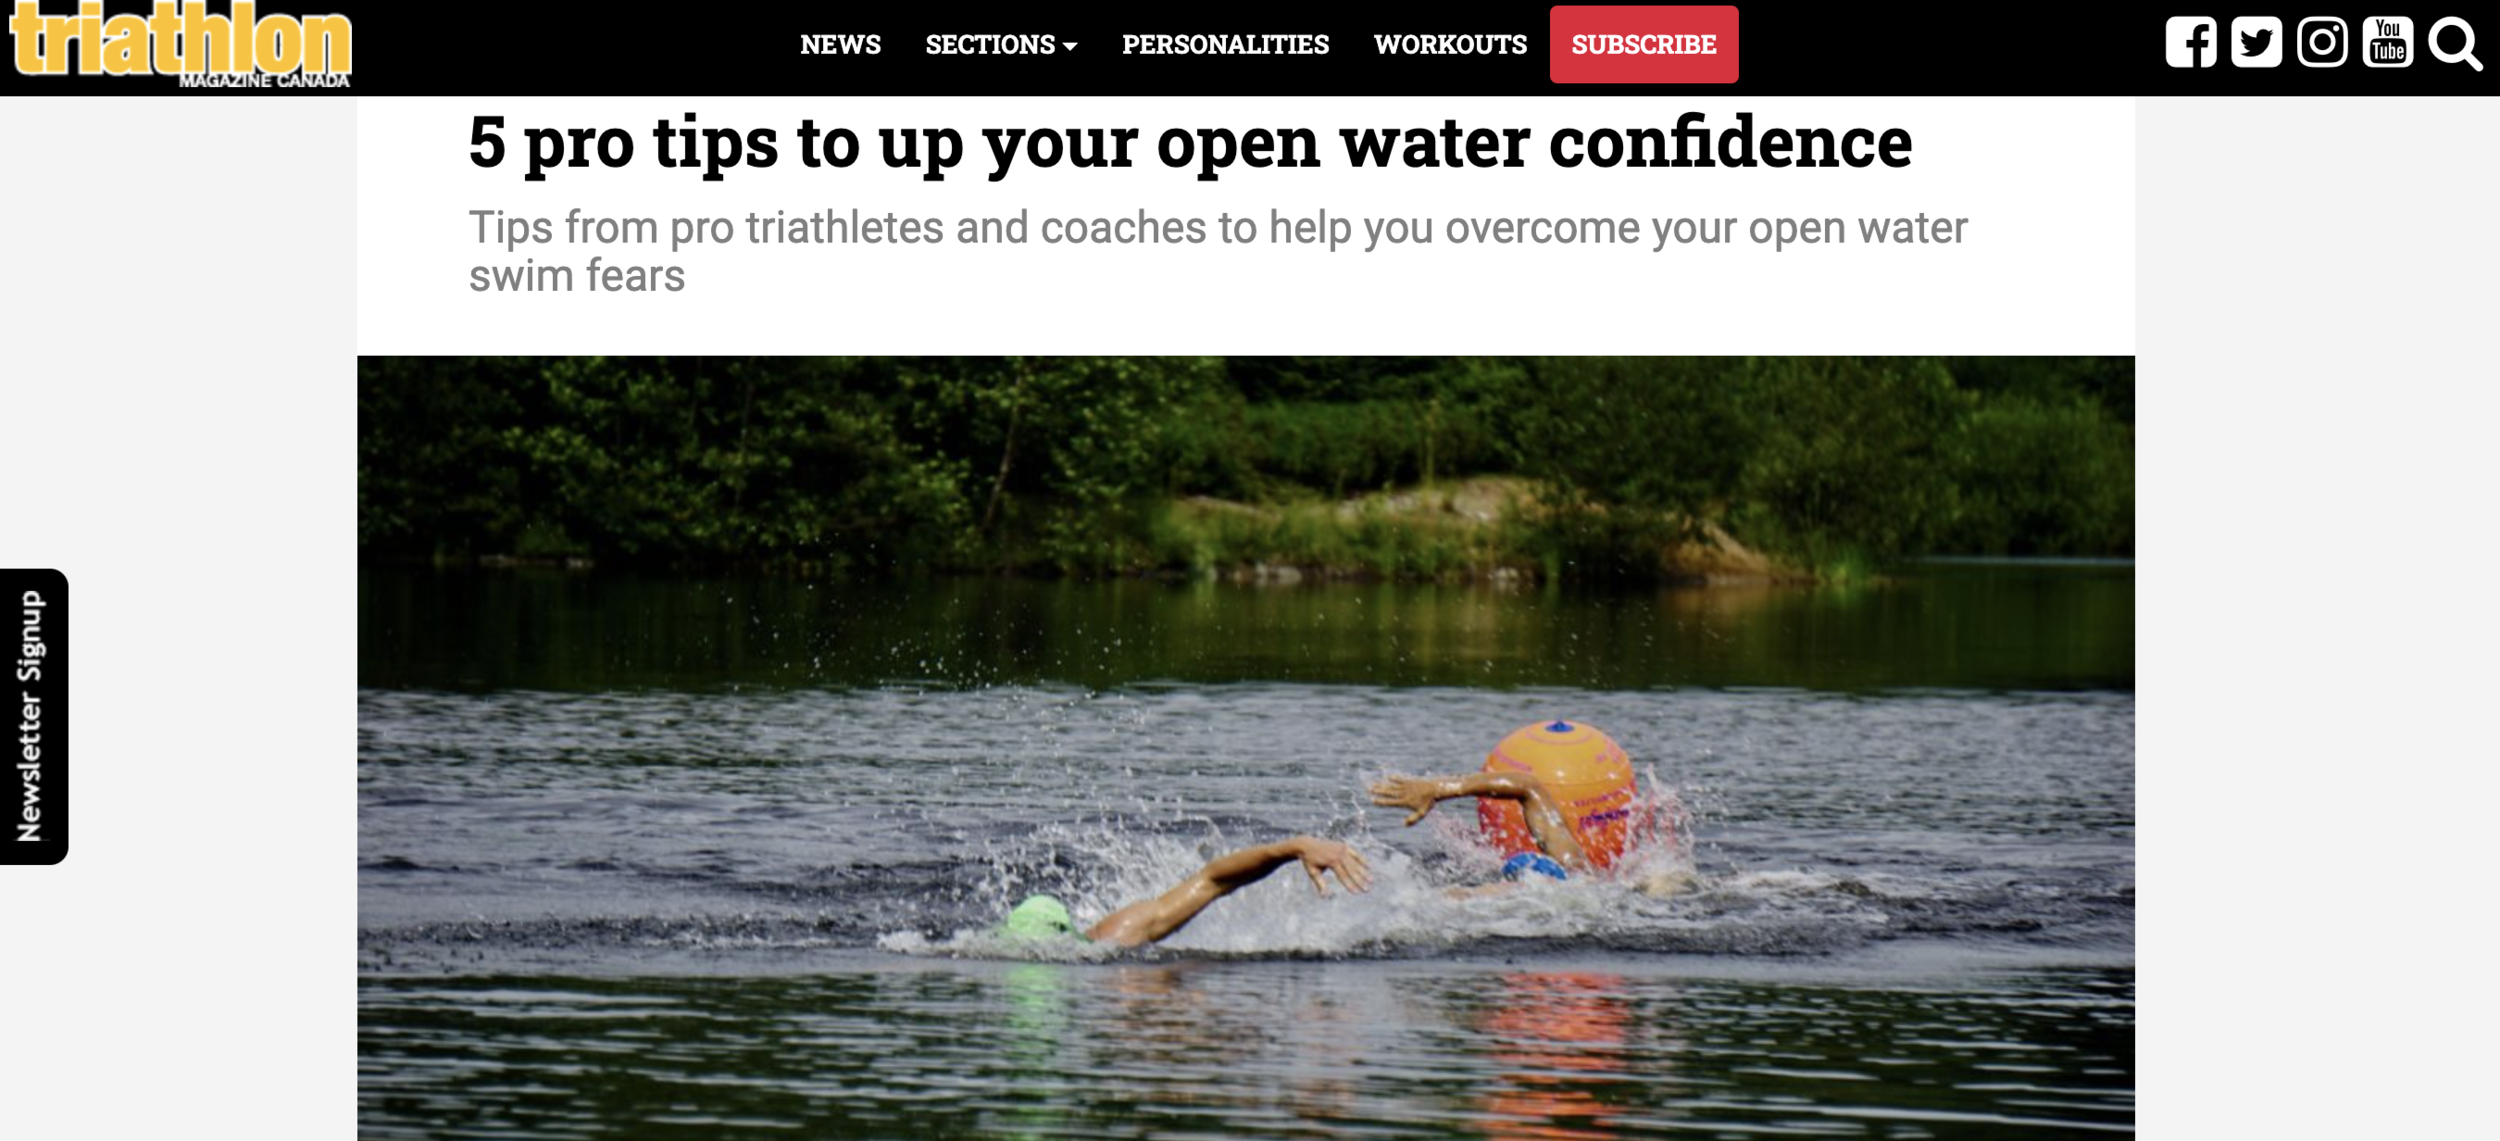 5 pro tips to up your open water confidence